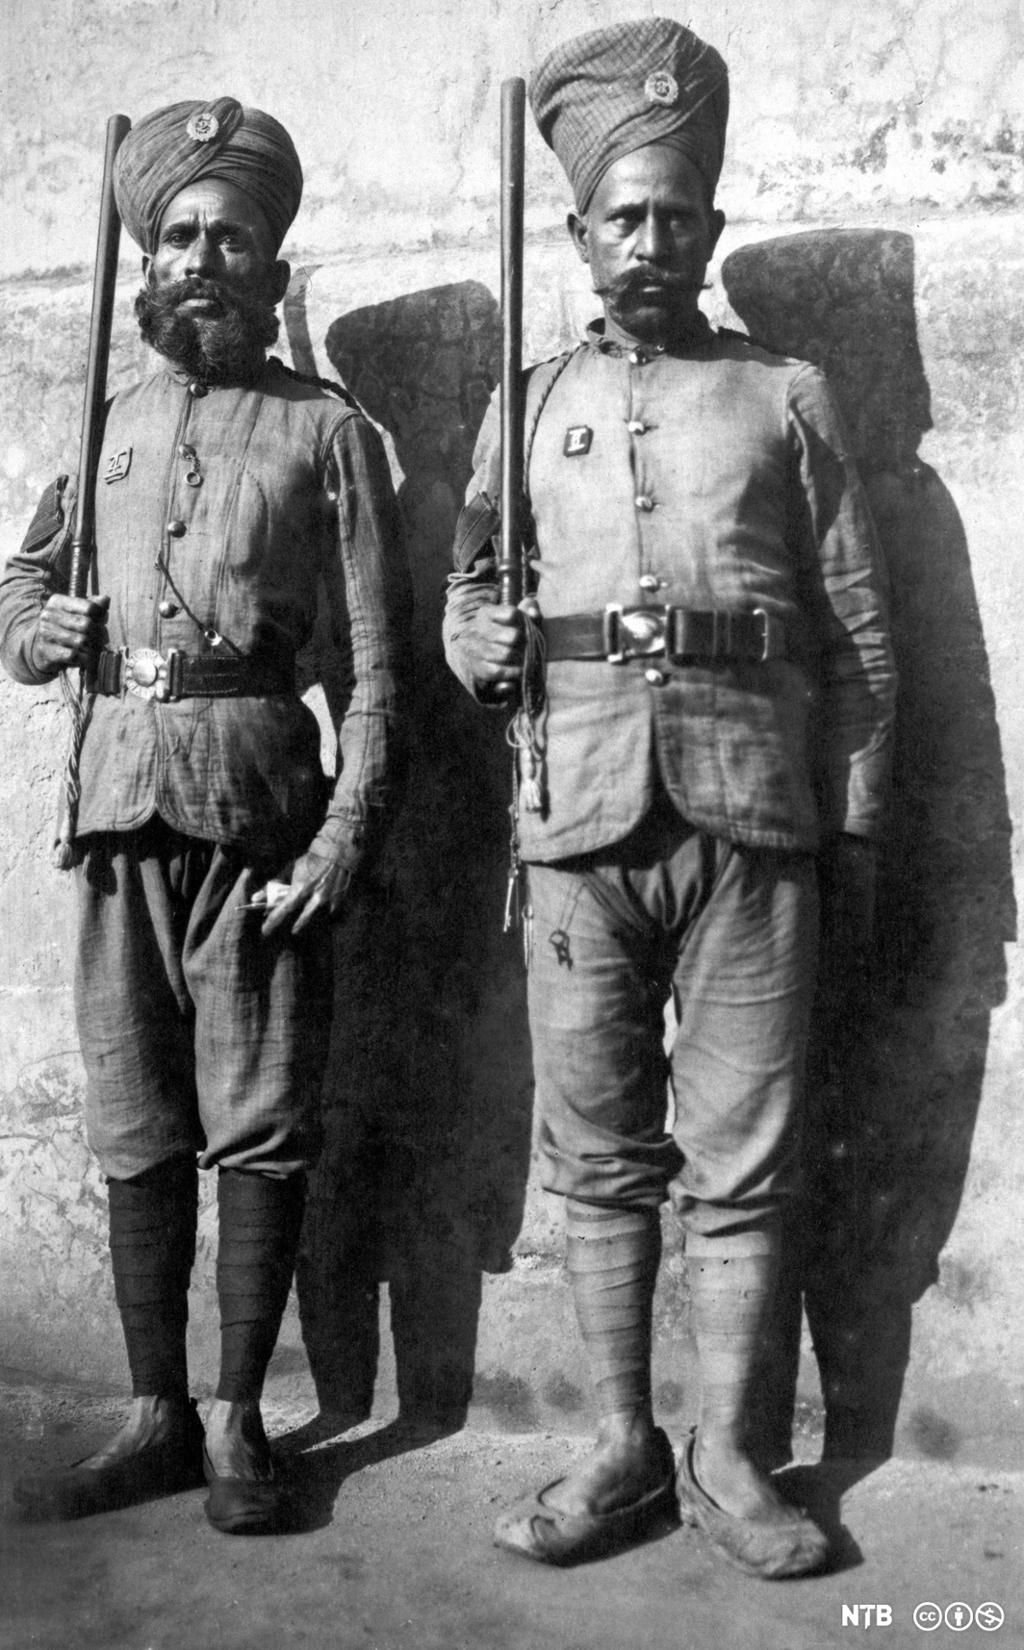 Two armed and uniformed prison guards standing next to a wall, Rangoon, Burma. 